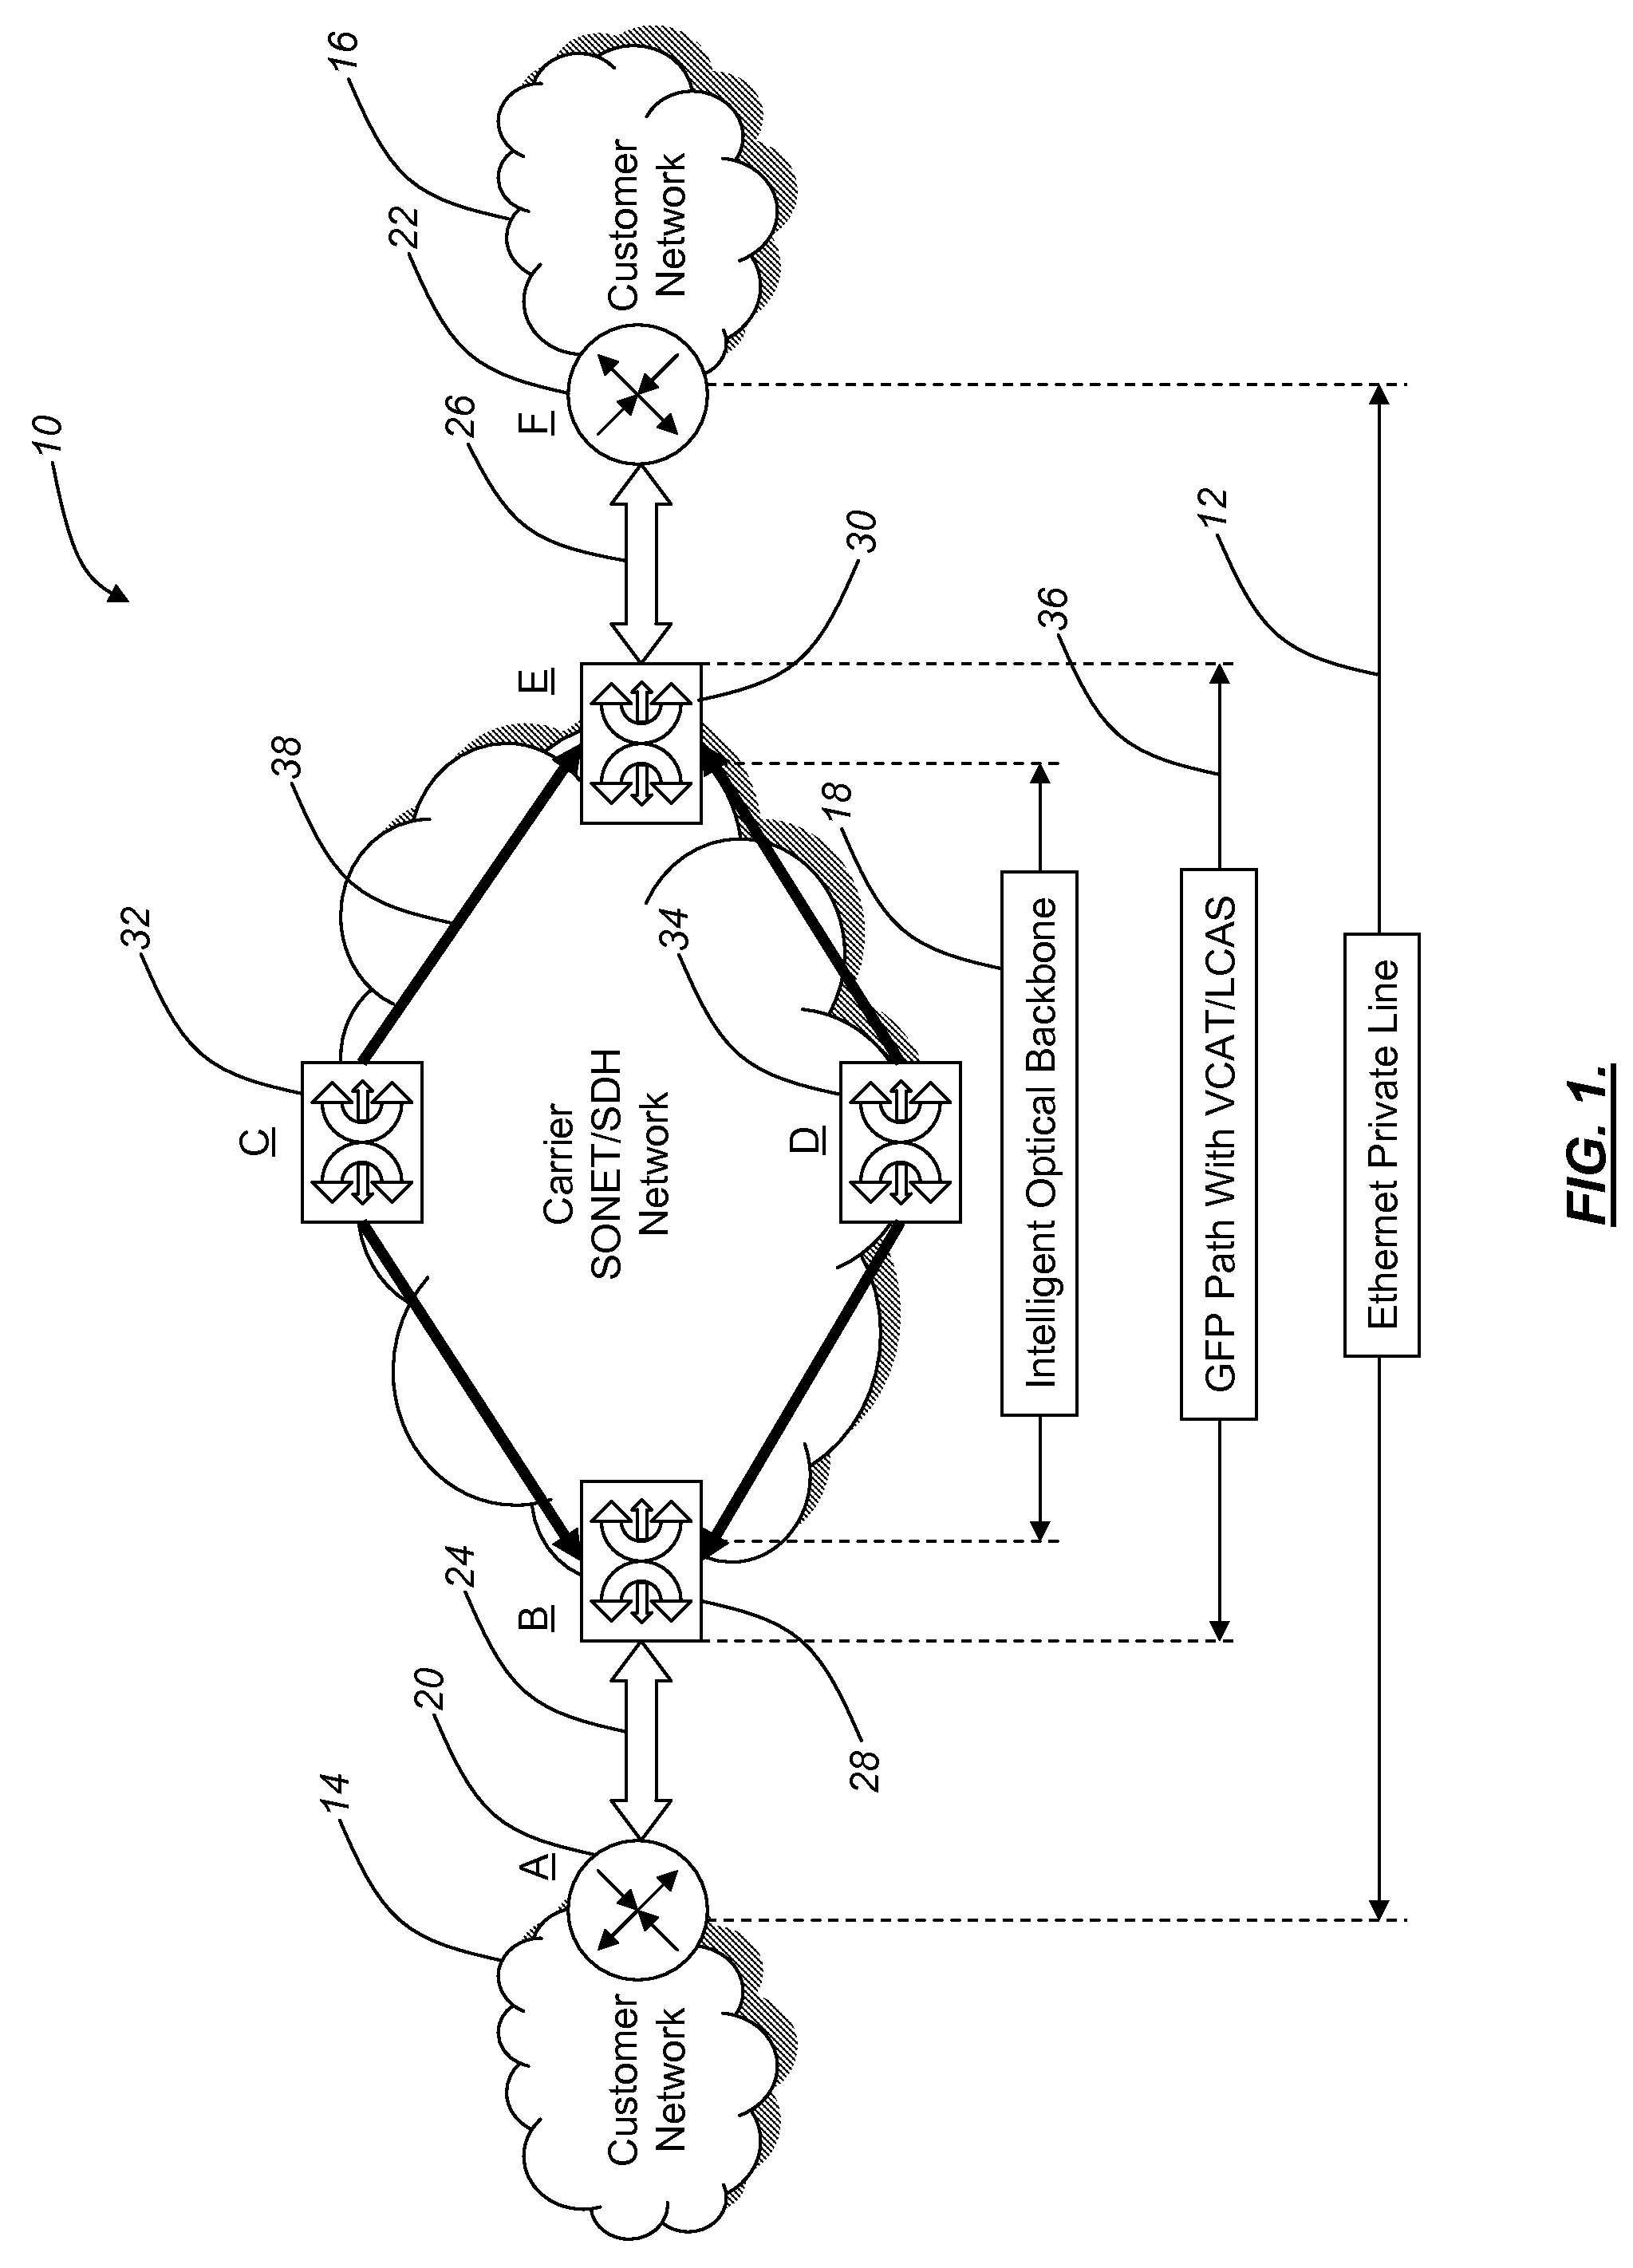 Method and apparatus for interfacing applications to LCAS for efficient SONET traffic flow control